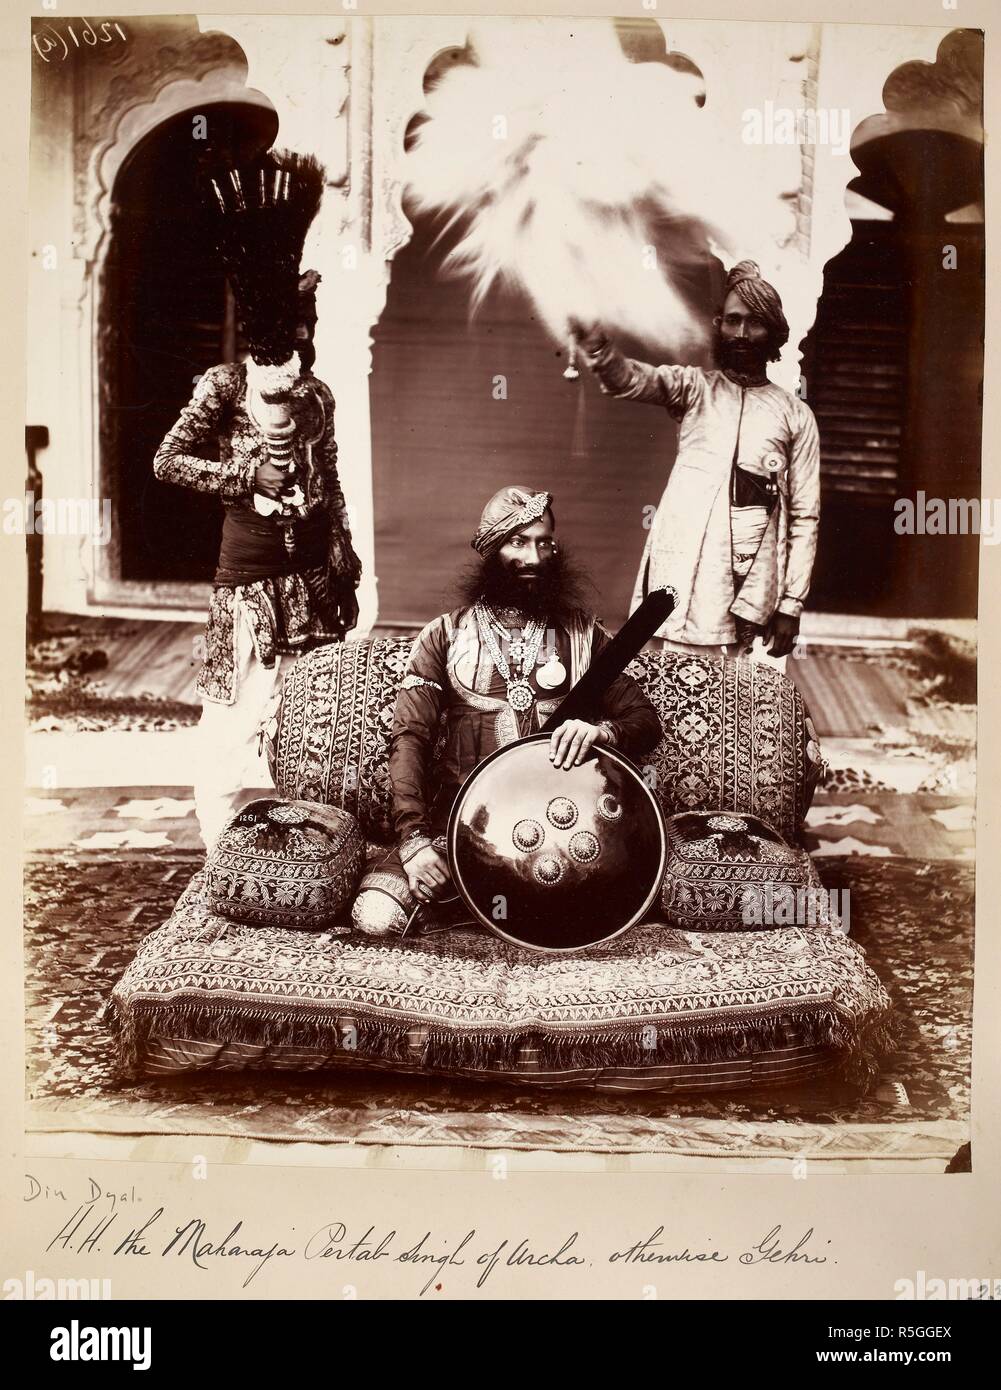 Portrait of H.H. the Maharaja Sir Pratap Singh of Orchha, at Tikamgarh. A full-length portrait, seated on cushions and holding a sword and shield. Two servants, with a fly whisk and fan, stand behind the Maharaja. Archaeological Survey of India Collections: India Office Series (volume 16: Central India and Gujarat). c. 1882. Photograph. Source: Photo 1000/16(1658). Language: English. Author: Dayal, Deen. Stock Photo